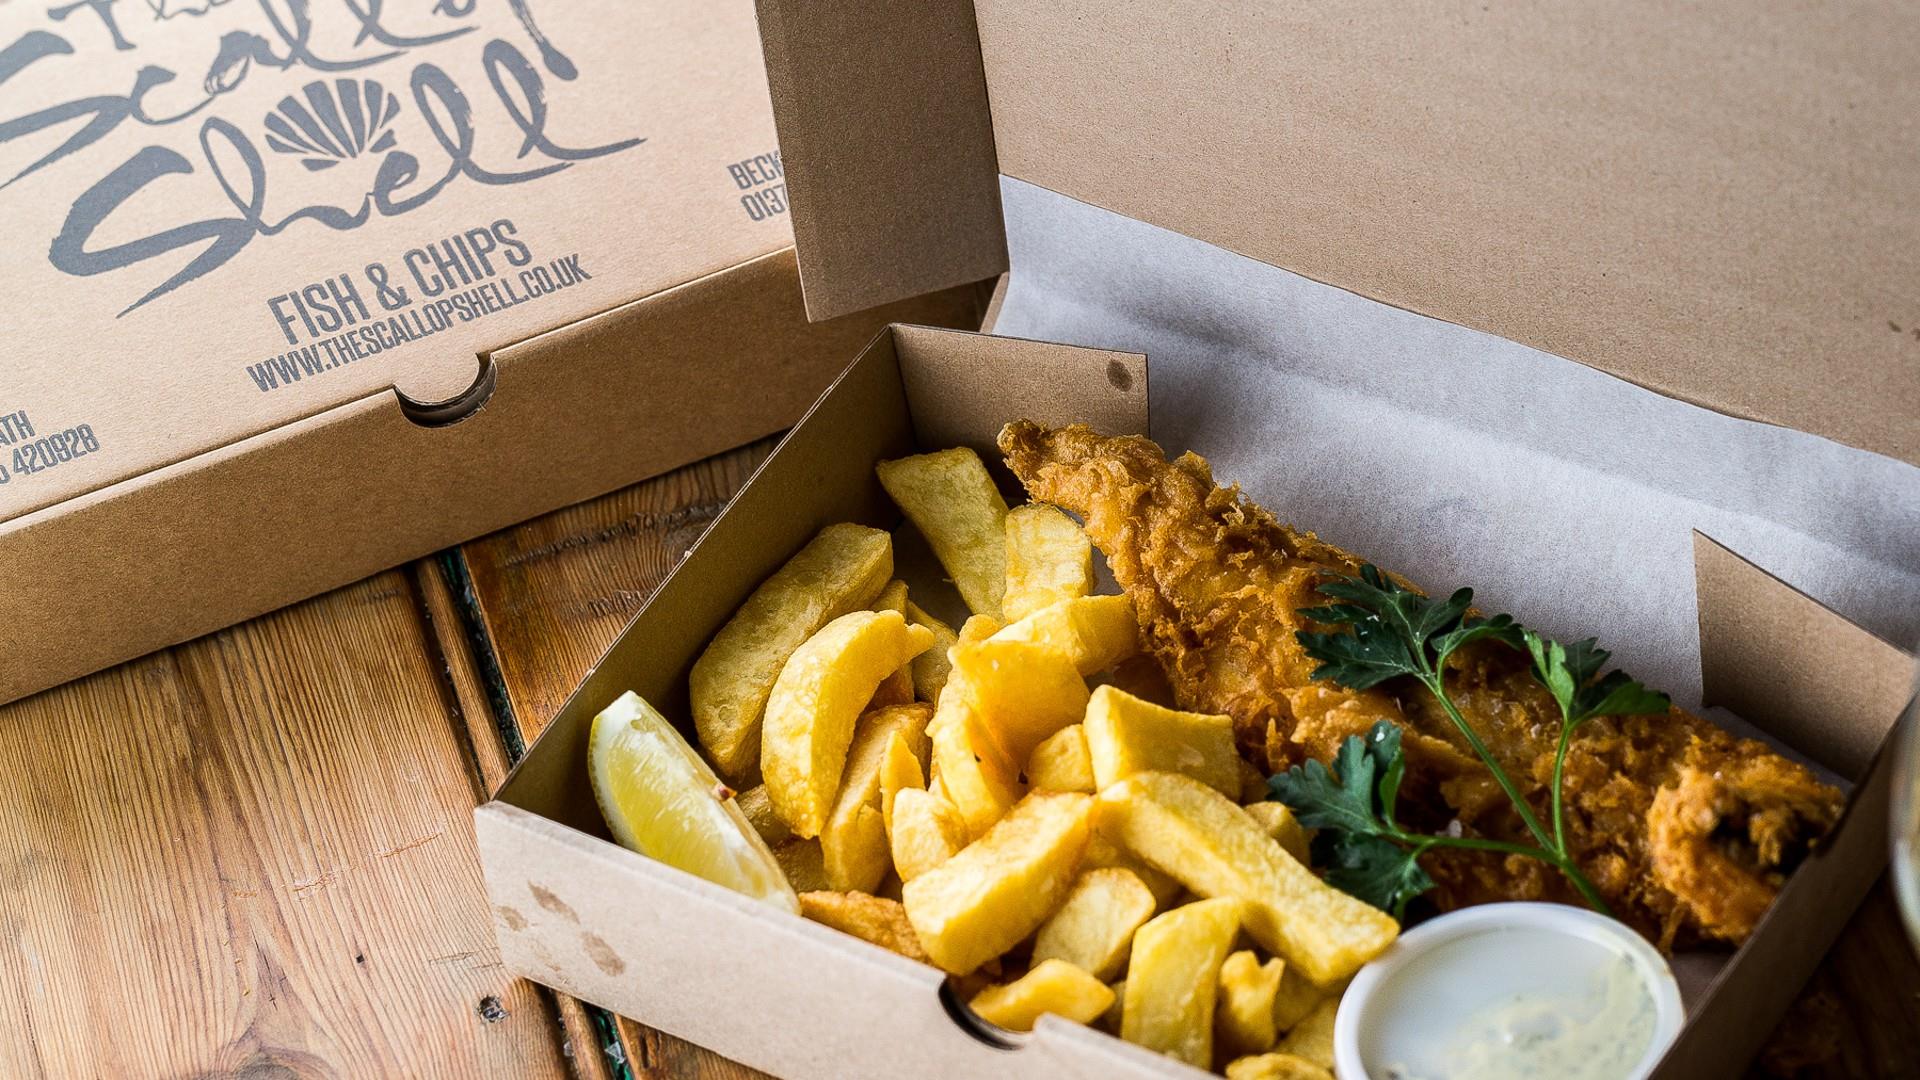 Takeaway and Food Delivery Services in Bath - Visit Bath